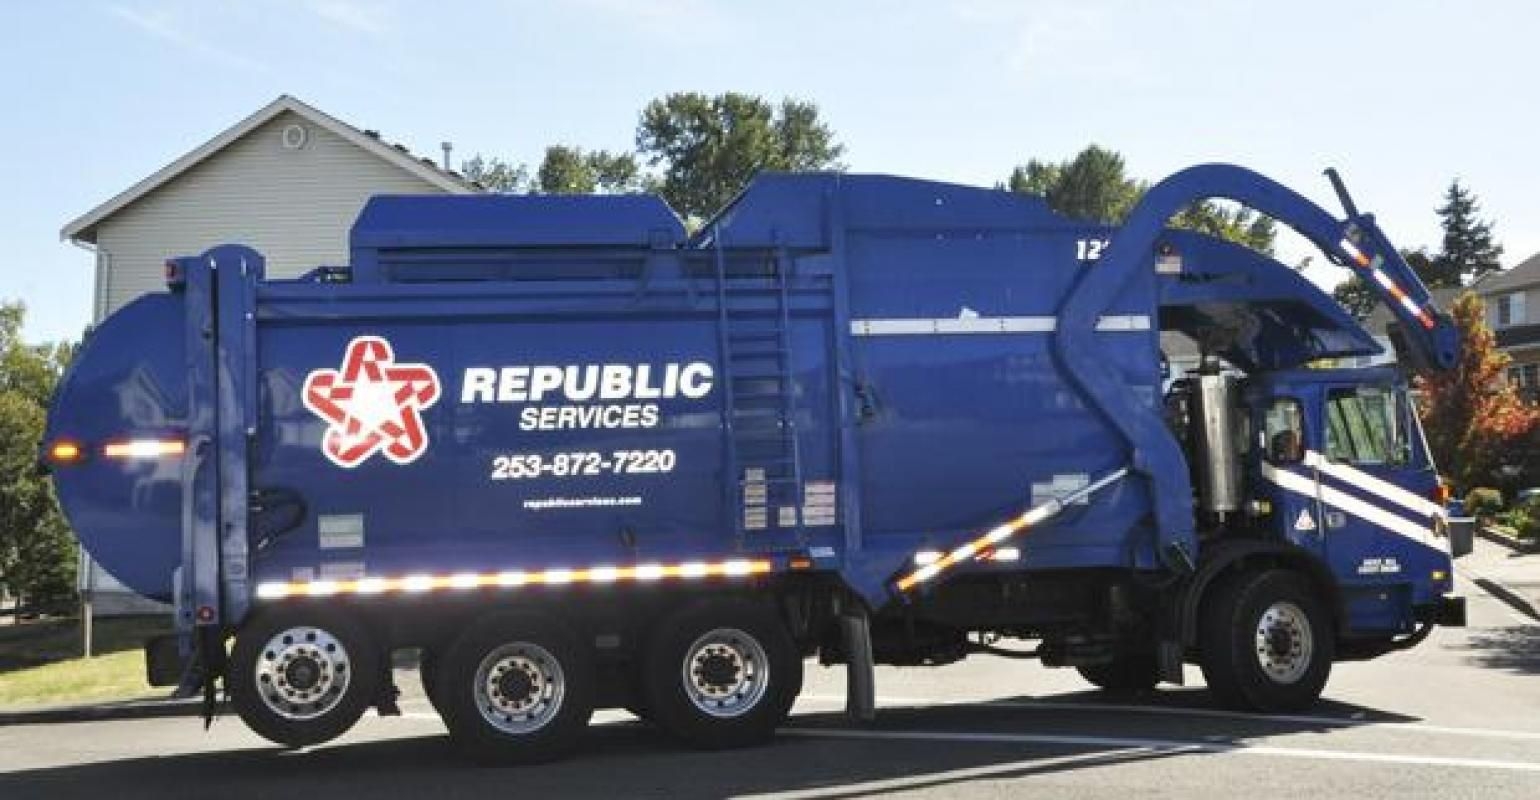 Getting Together For The Future Of Fleet Safety: Republic